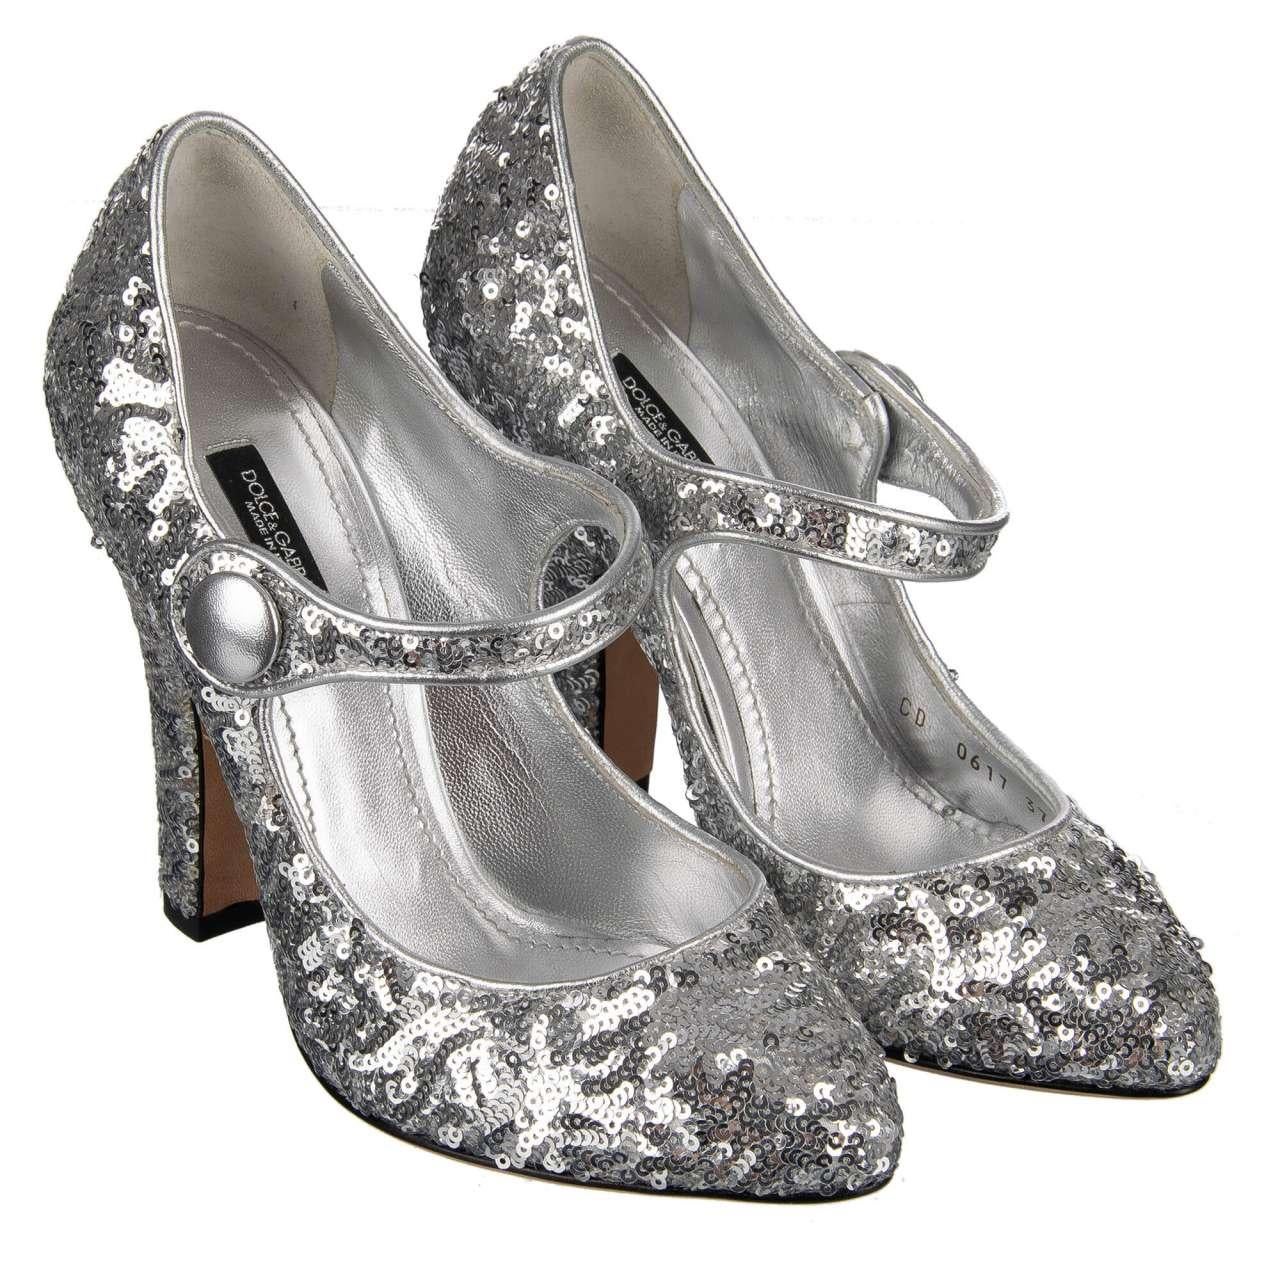 Dolce & Gabbana - Sequined Mary Janes VALLY Silver EUR 36 For Sale 1